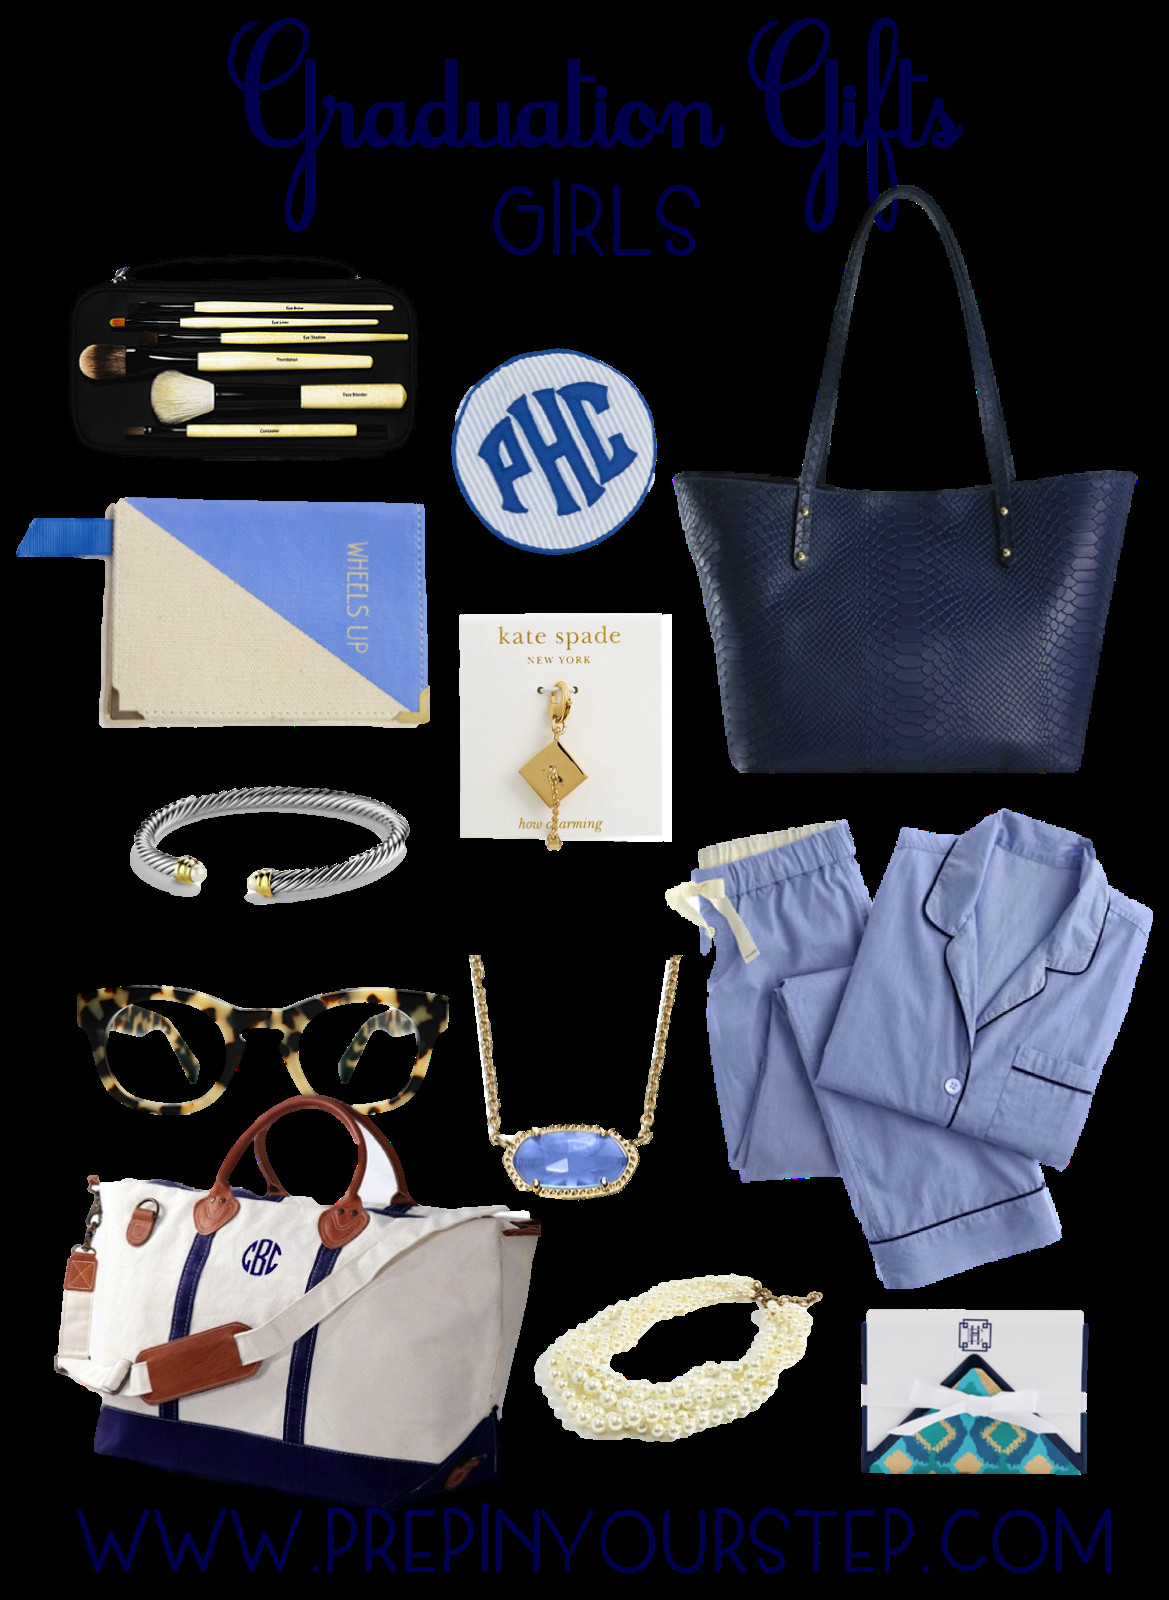 Gift Ideas For High School Girls
 Prep In Your Step Graduation Gift Ideas Guys & Girls